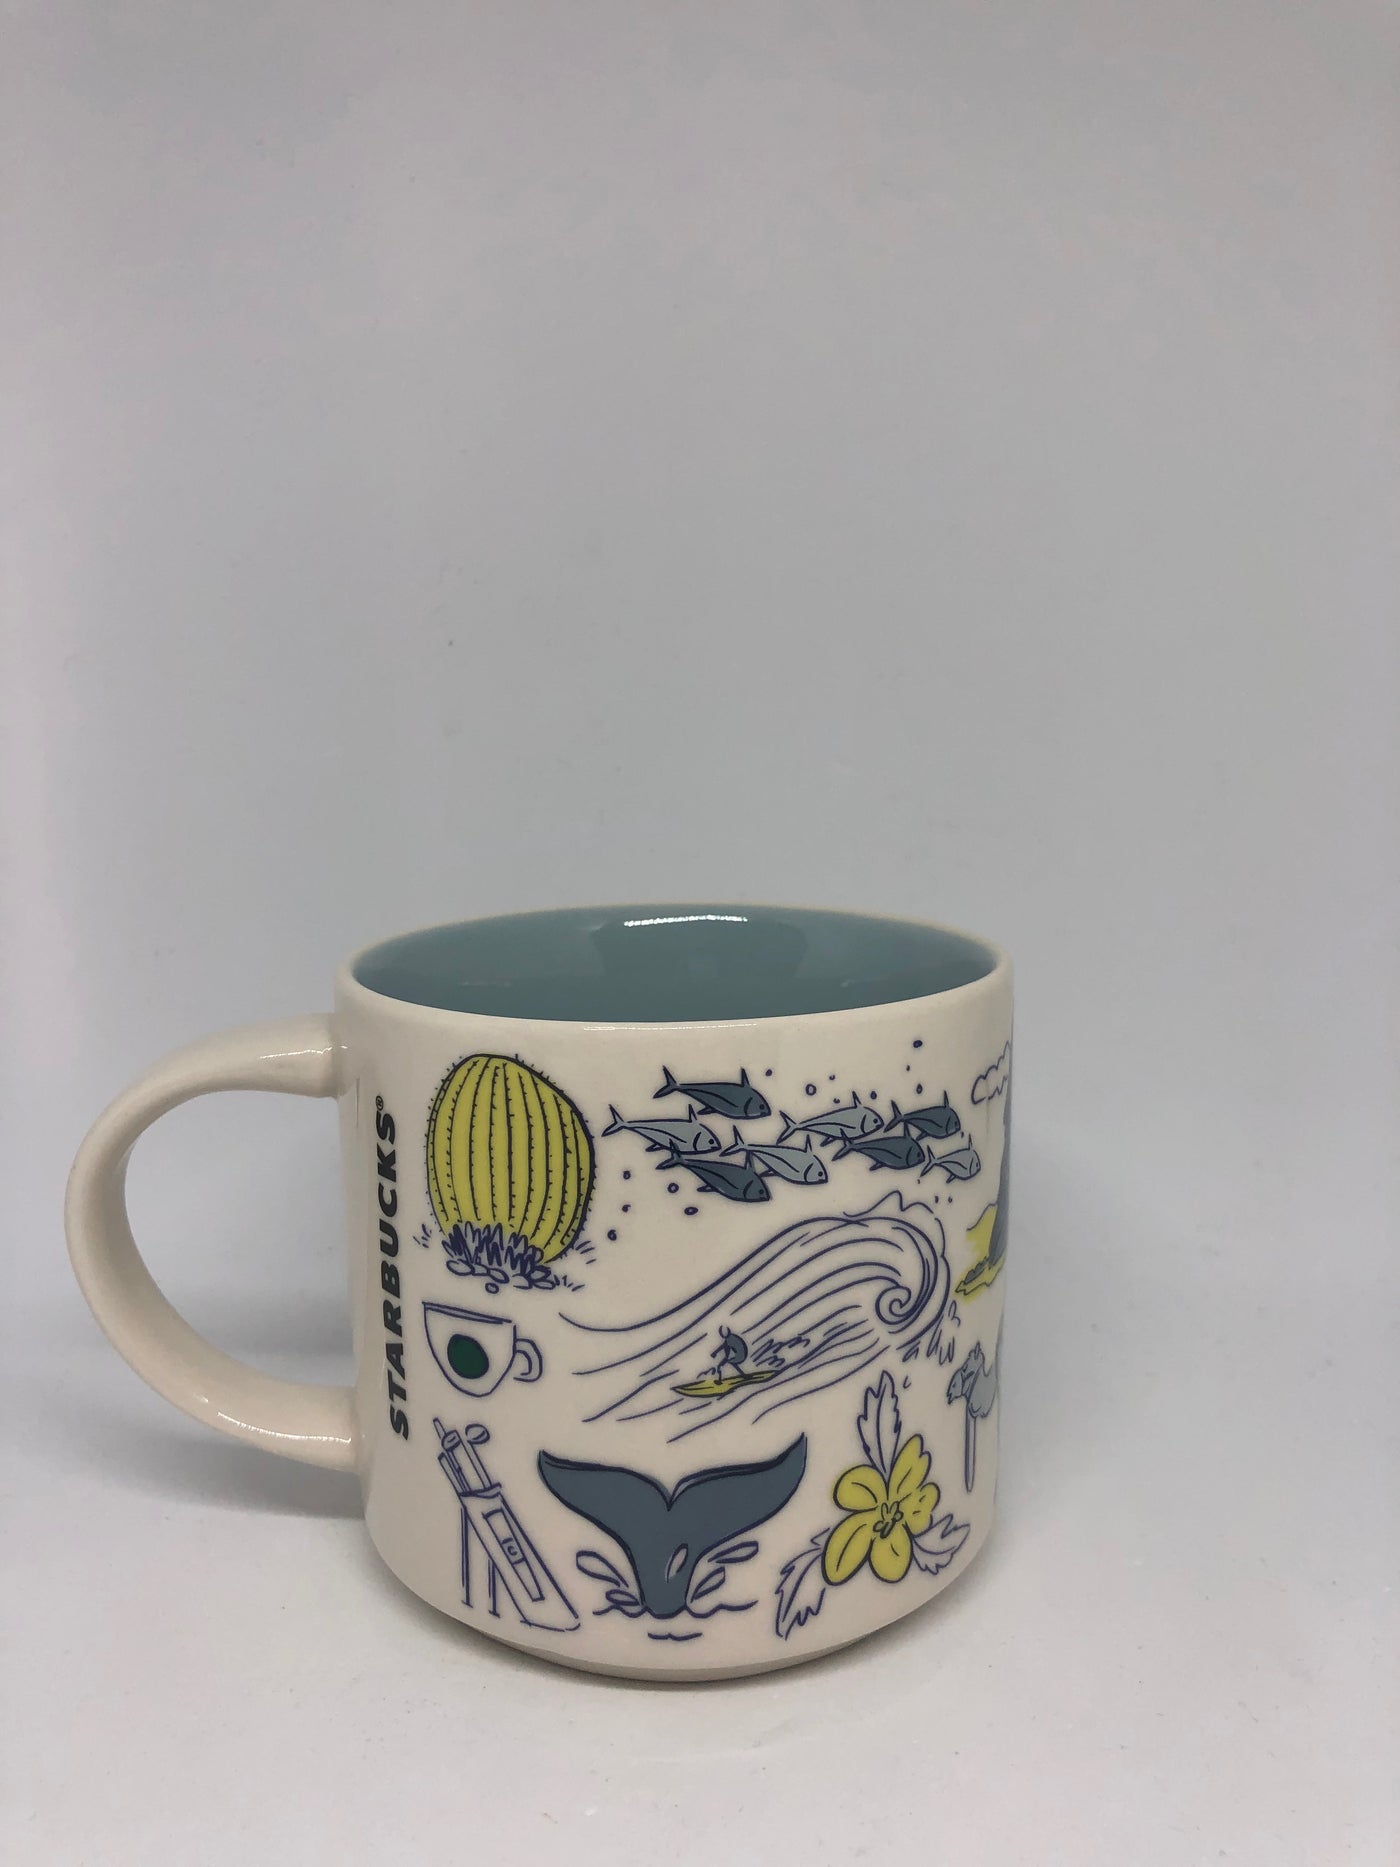 Starbucks Been There Series Los Cabos Mexico Ceramic Coffee Mug New with Box